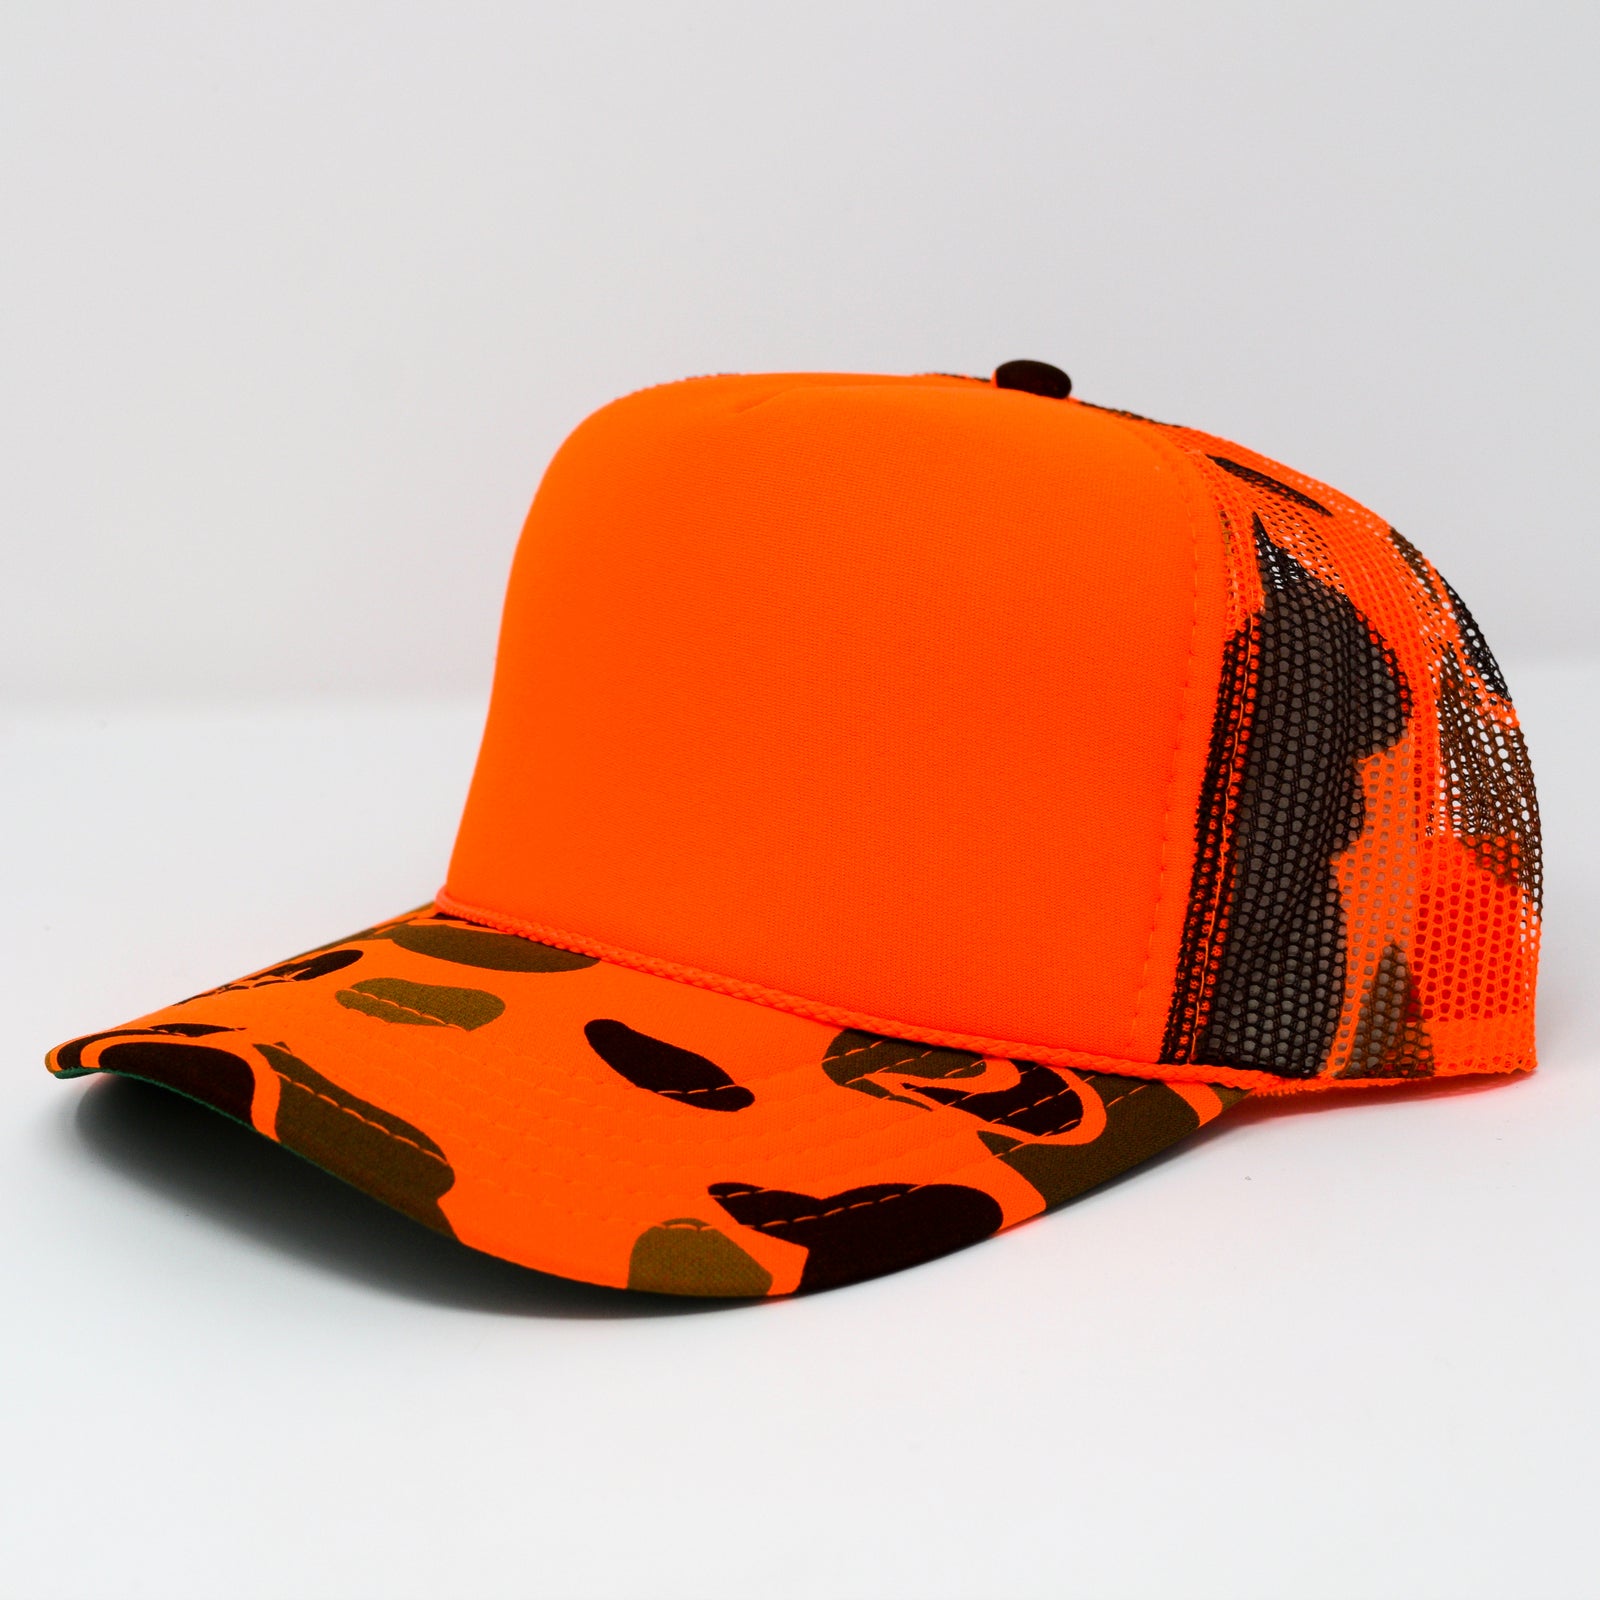 Camo Hats - The Mad Hatter Company